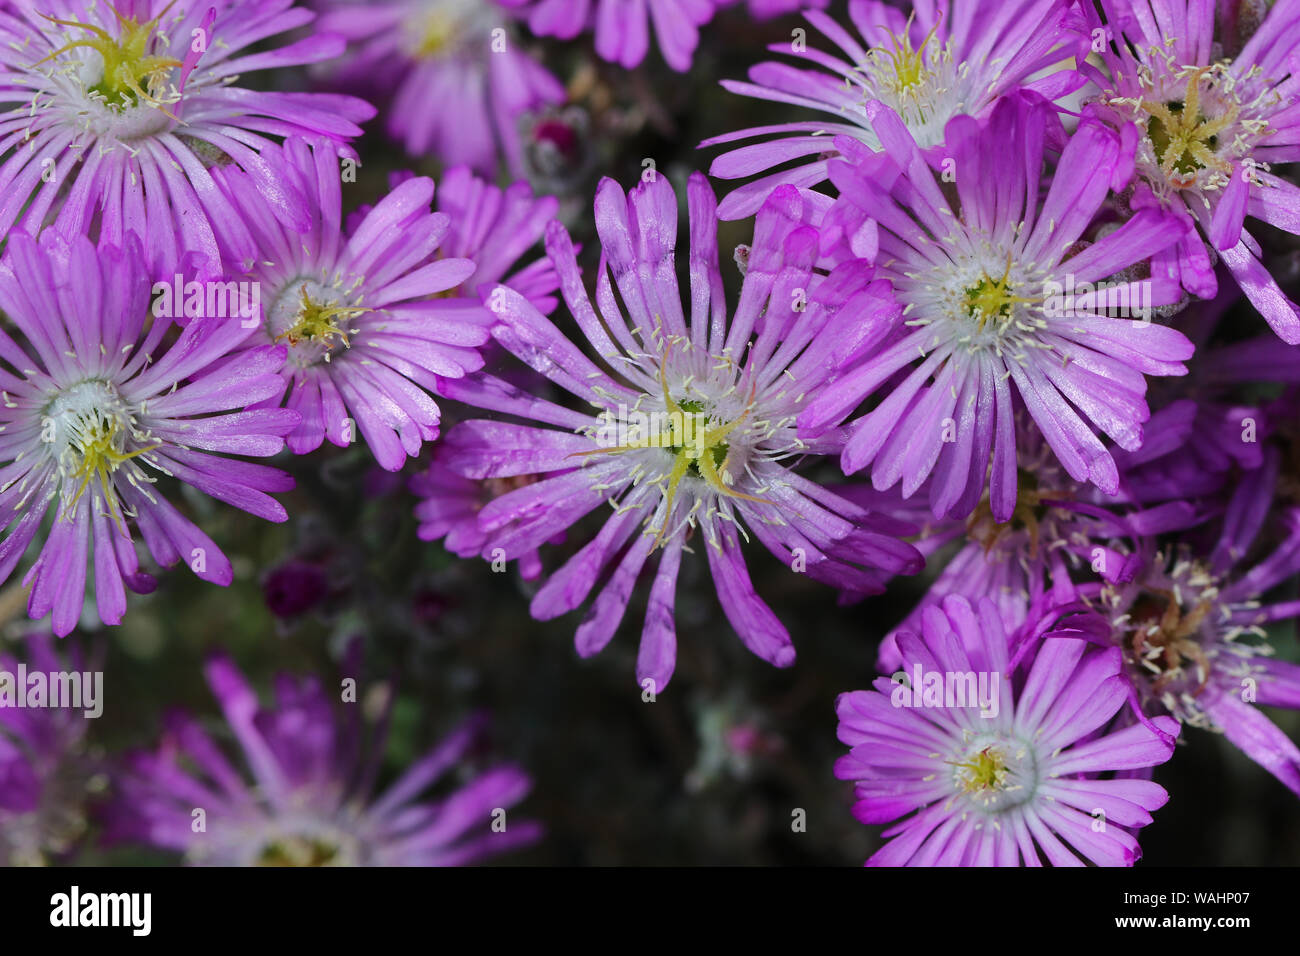 hairy dewflower Latin drosanthemum hispidum also called a purple or rosea ice plant a perennial evergreen succulent in the sedum family of flowers Stock Photo